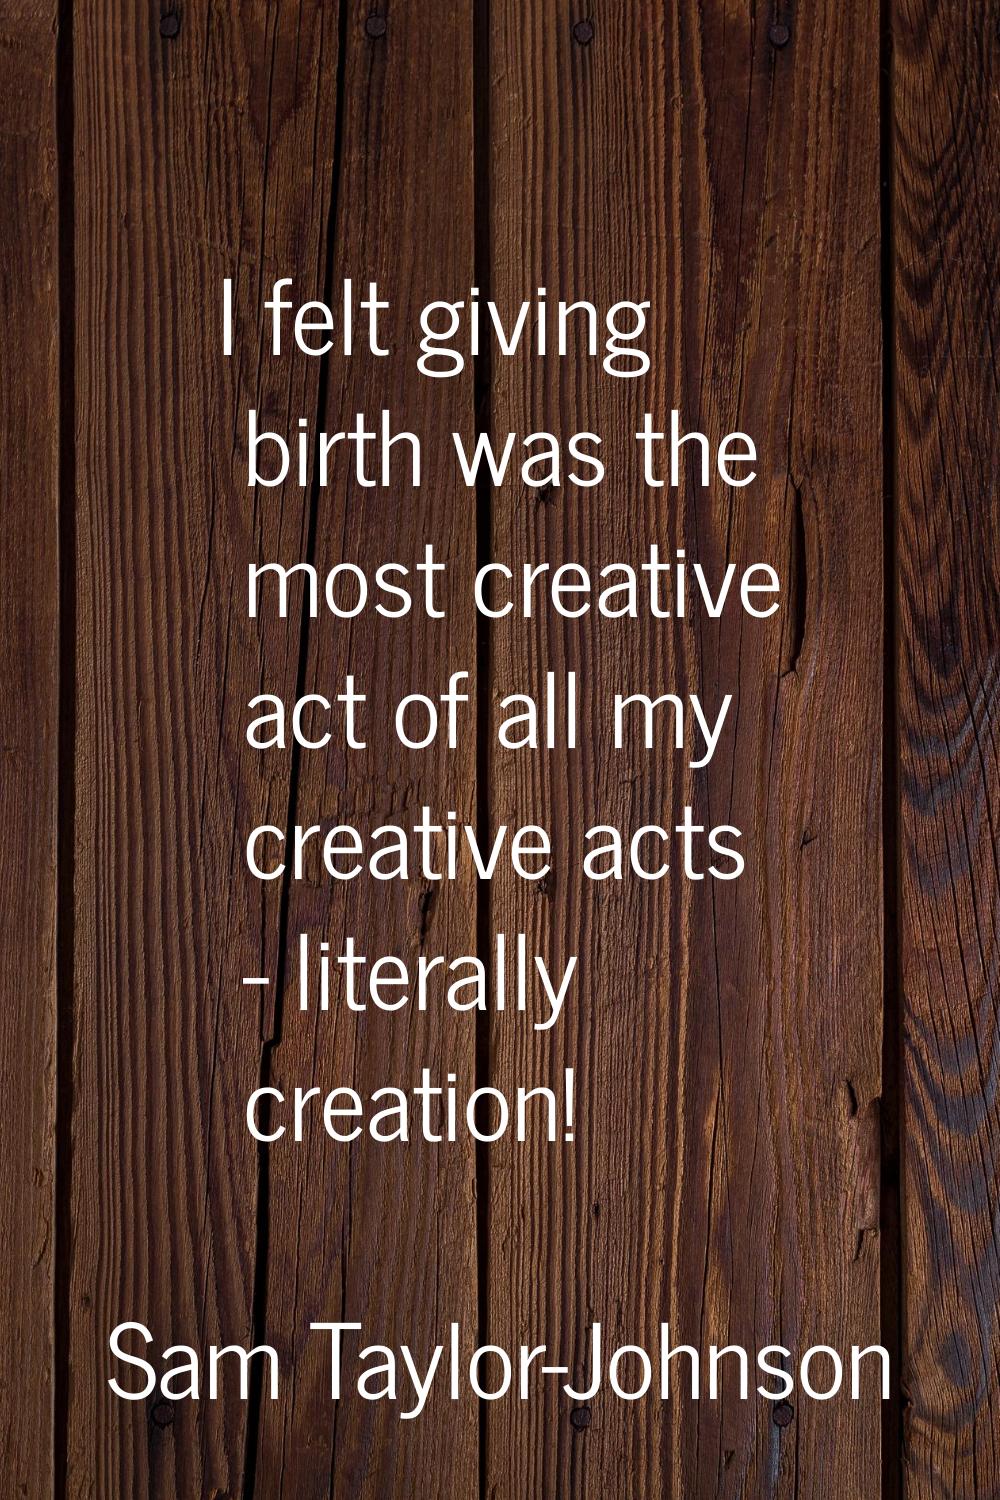 I felt giving birth was the most creative act of all my creative acts - literally creation!